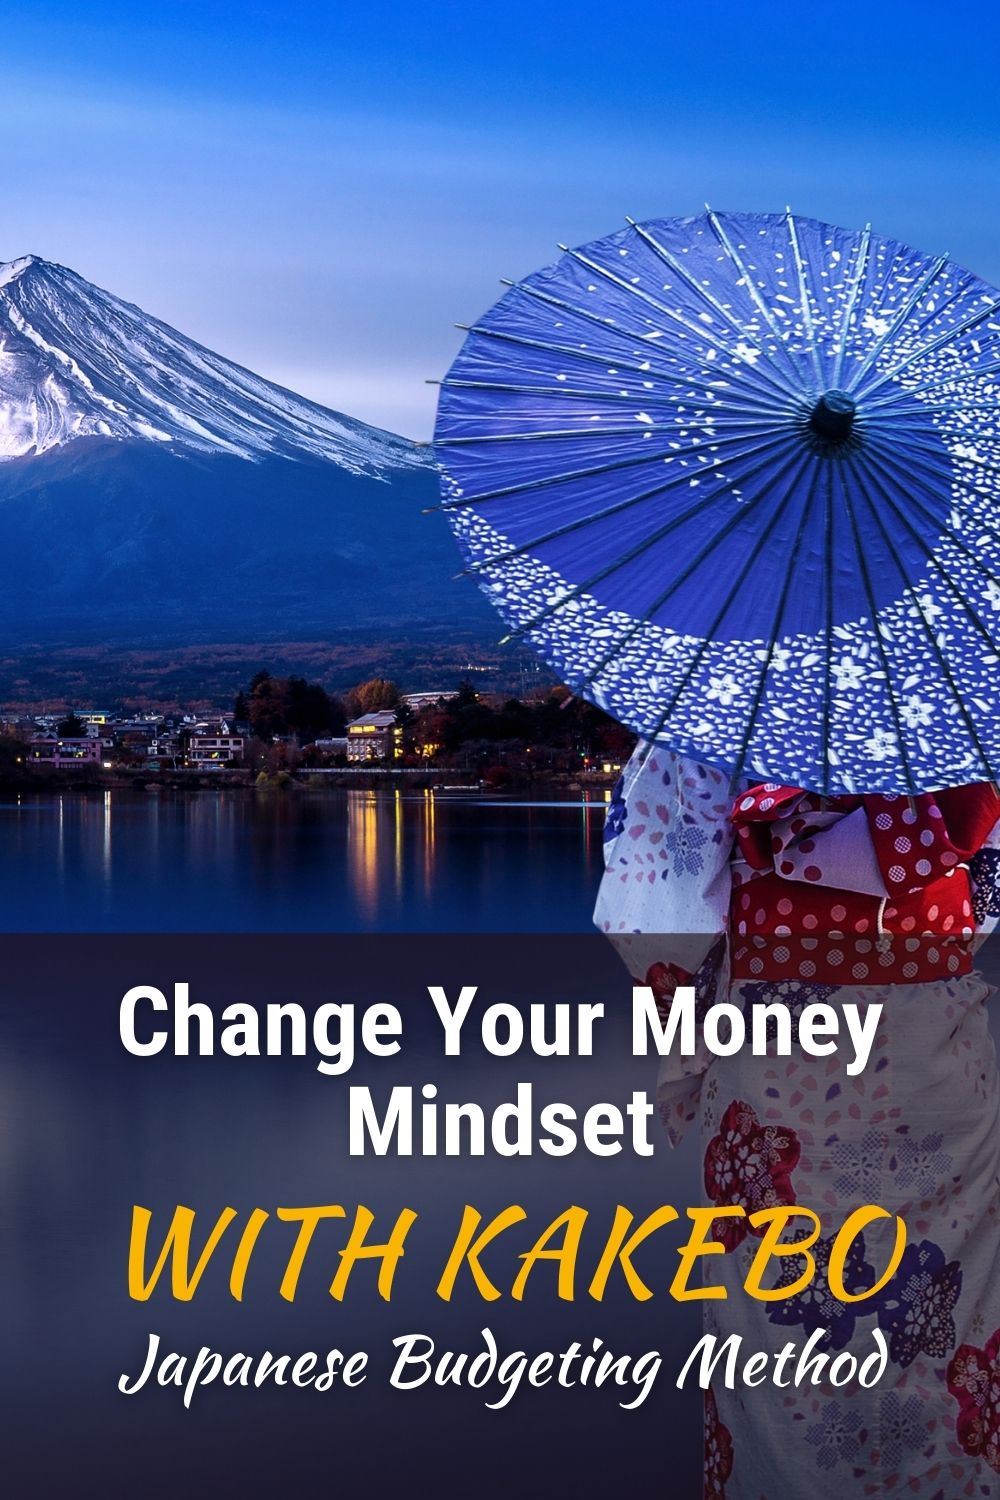 Change Your Money Mindset with the Kakebo Budget